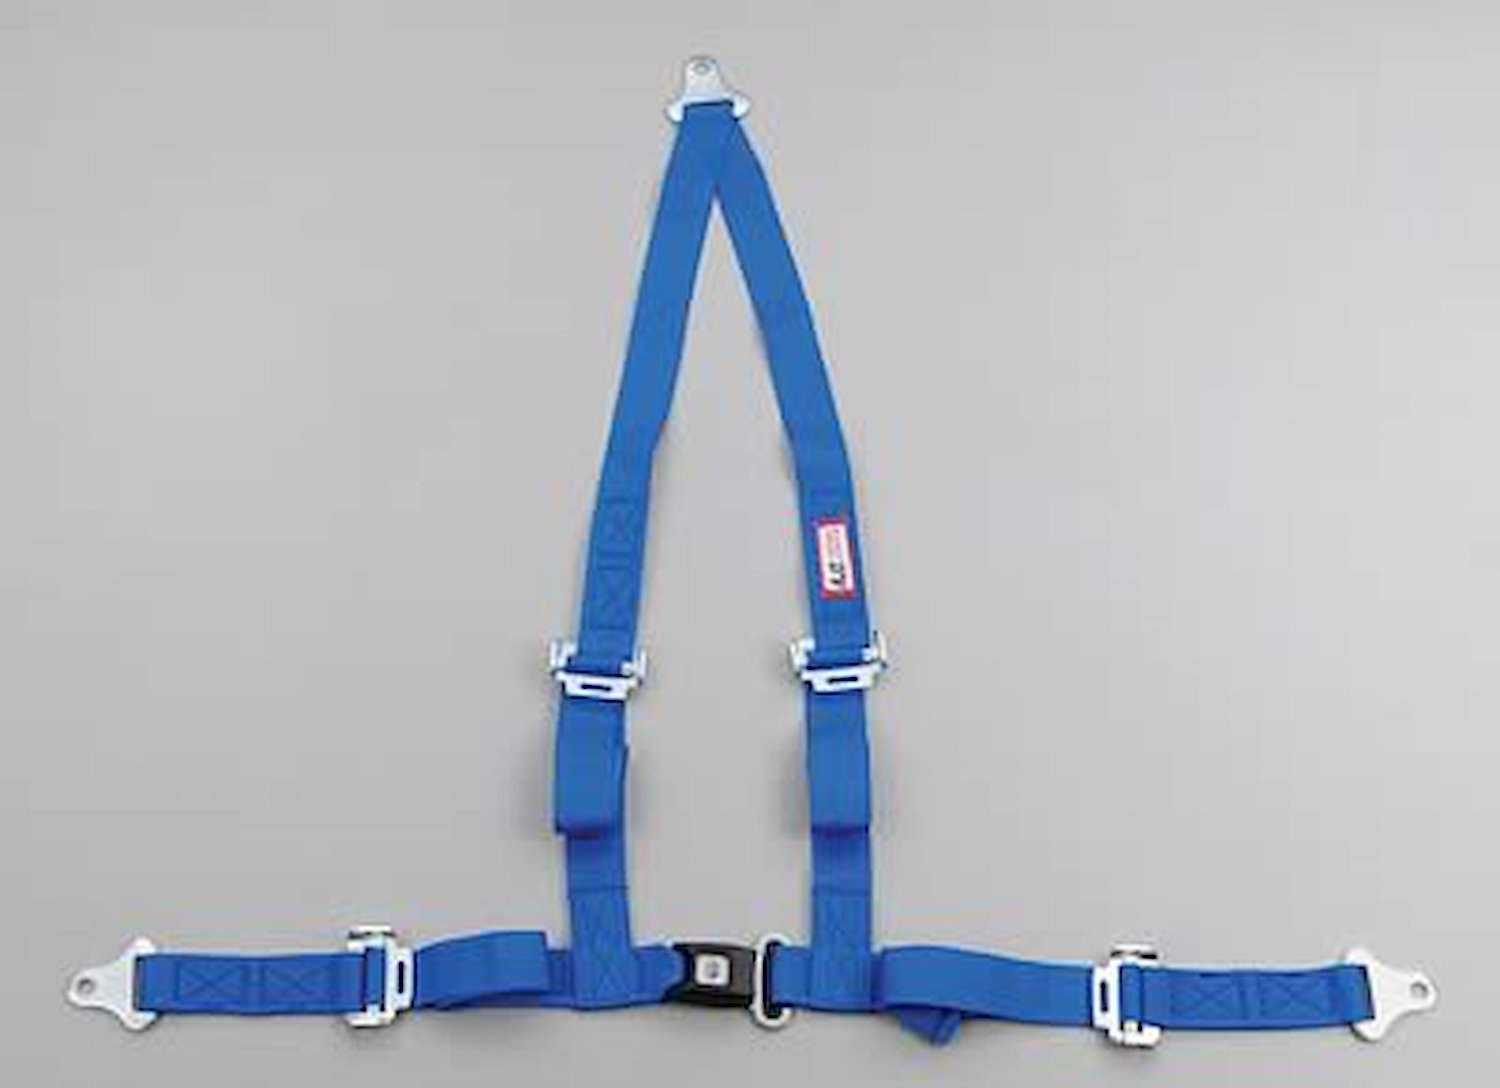 NON-SFI B&T HARNESS 2 PULL UP Lap Belt 2 S. H. V ROLL BAR Mount ALL WRAP ENDS w/STERNUM STRAP BLUE